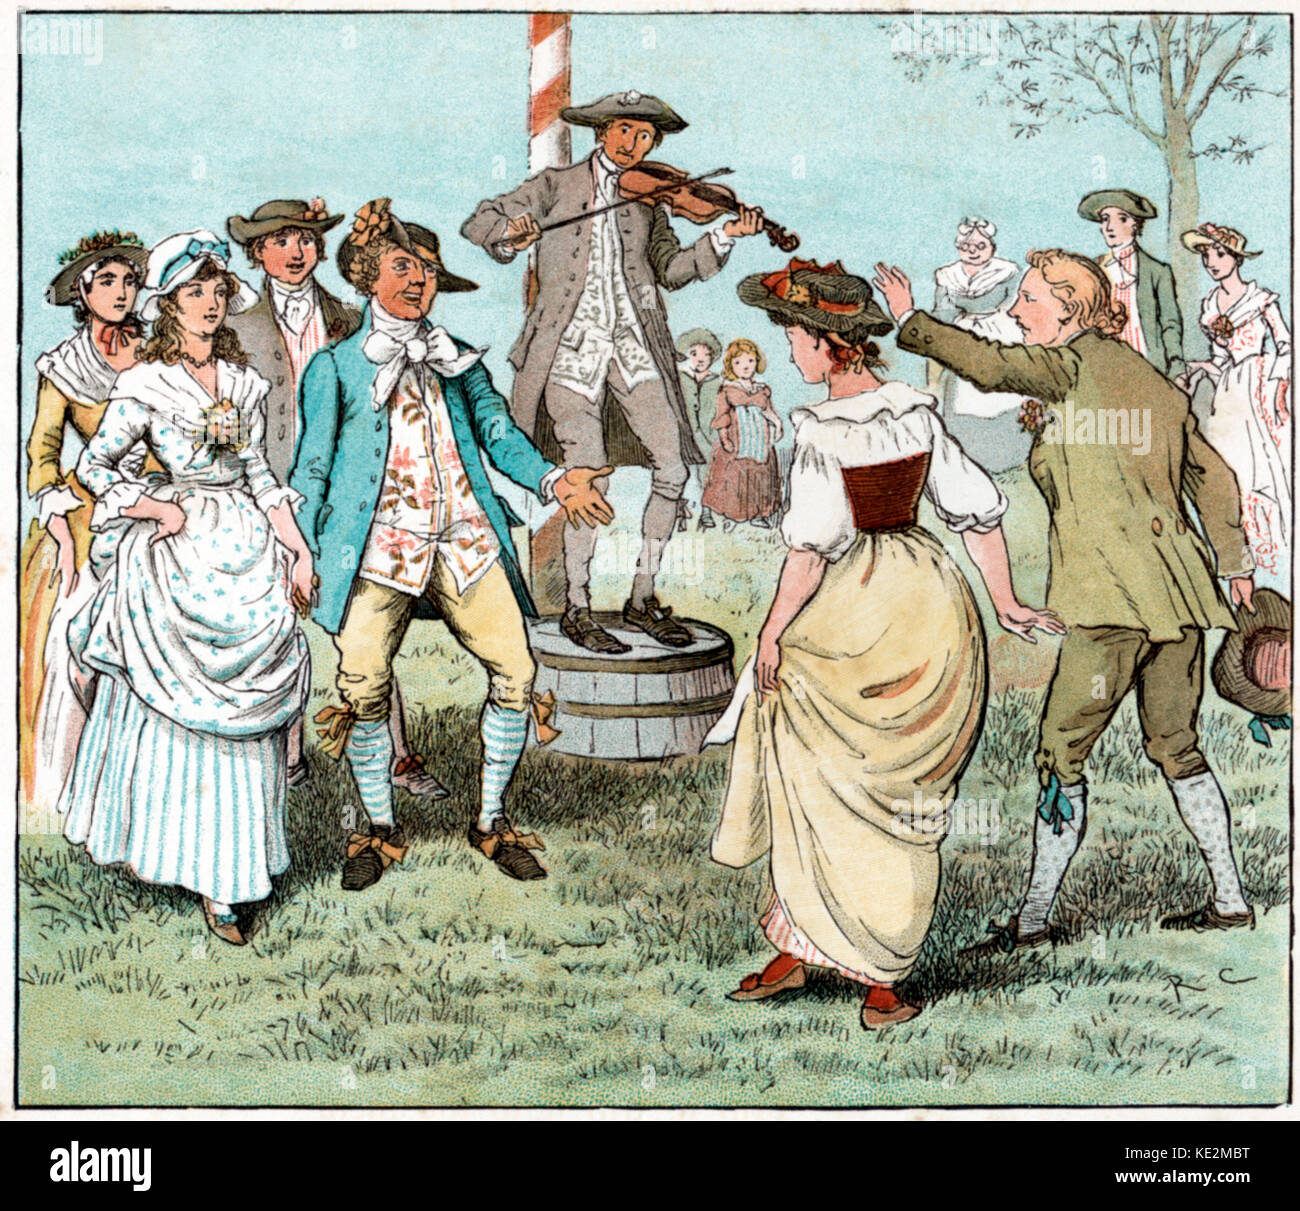 English folk dancing, 18th century.  By Randolph Caldecott (English illustrator, 22 March 1846 - 12 February 1886).  Country dancing, fiddle player, curtsey, curtsy.  Breeches Stock Photo